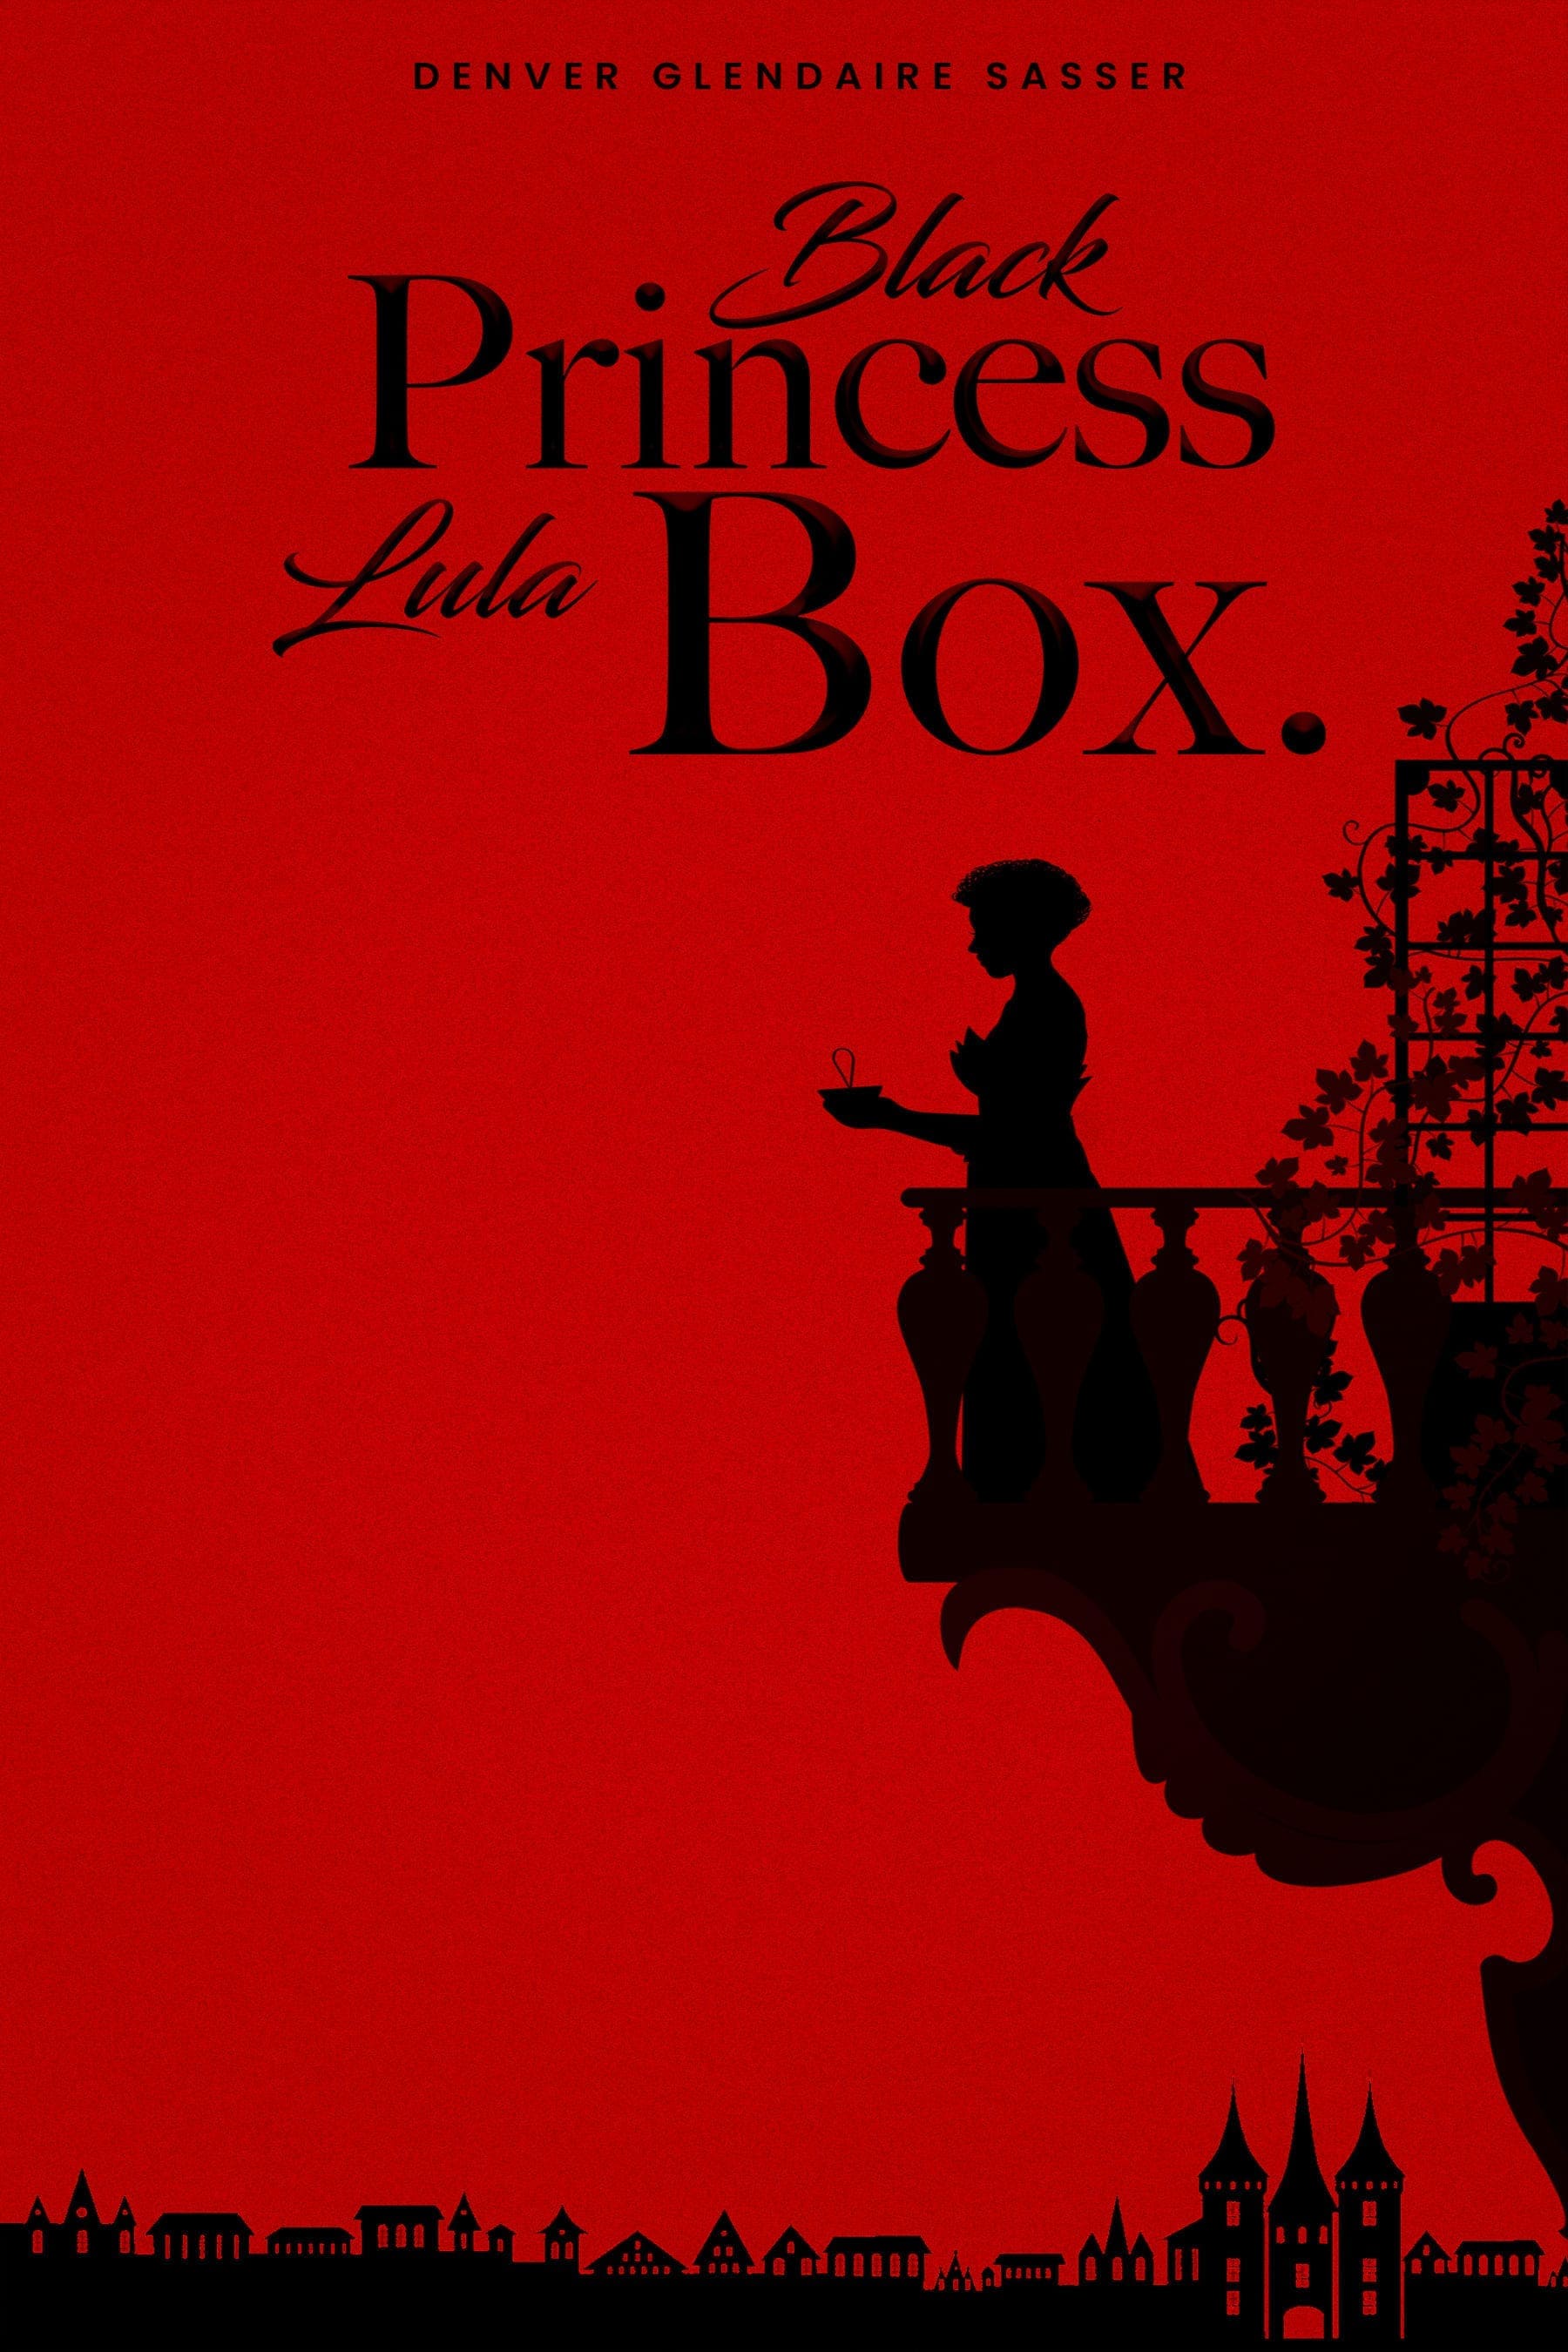 Movie poster for Black Princess Lula Box, featuring a young princess with a crown, surrounded by a magical forest.